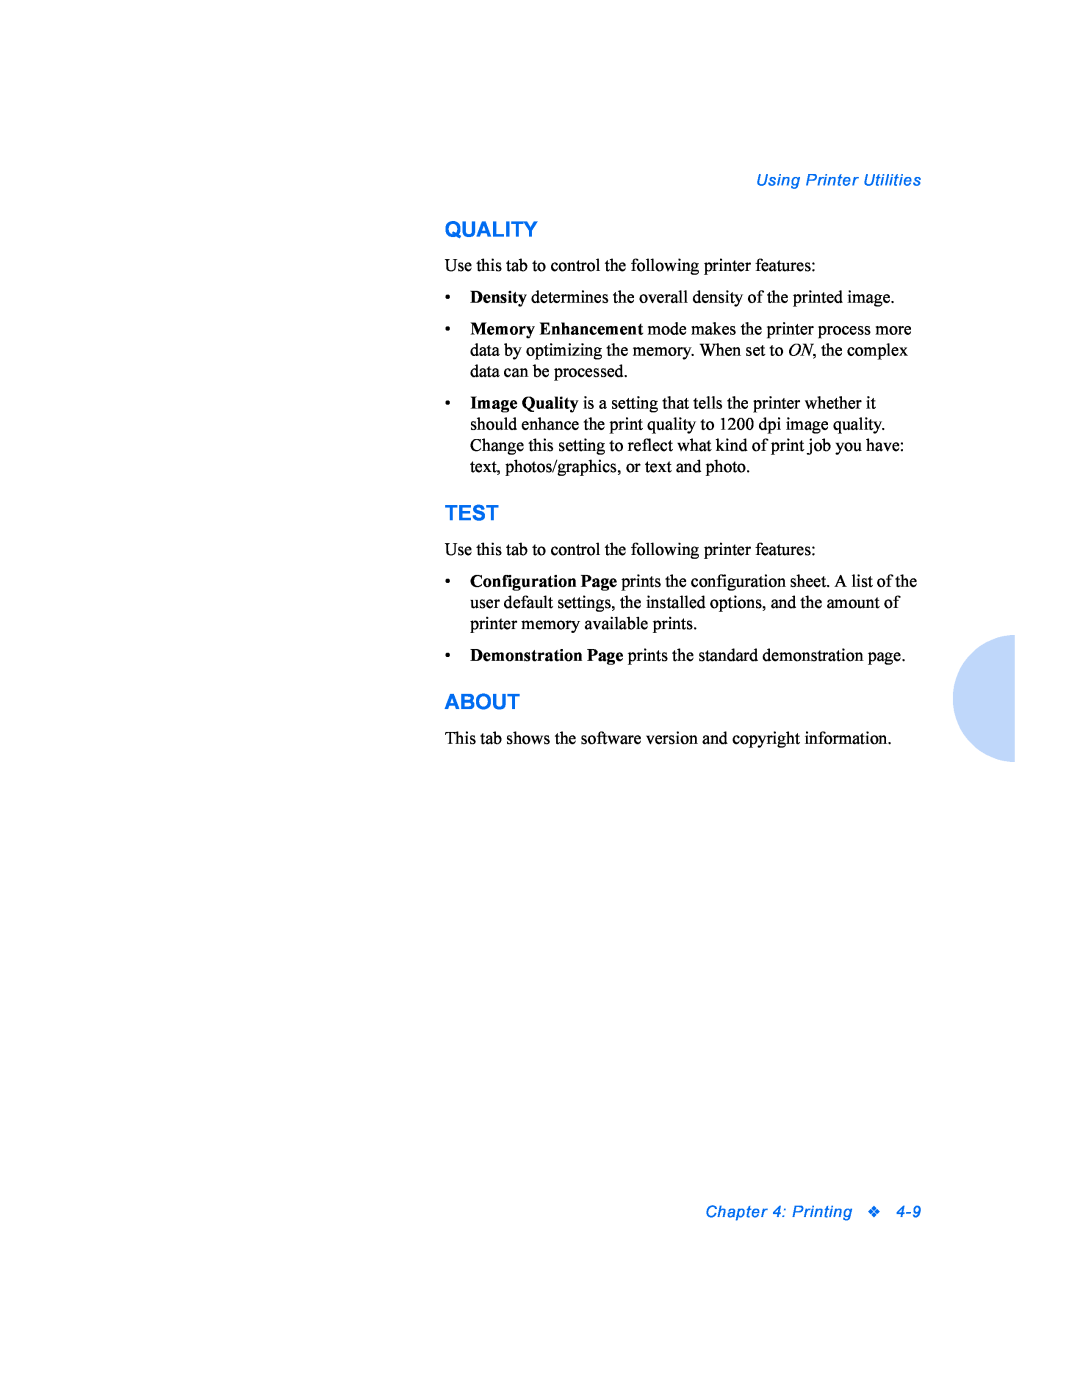 Xerox P8EX manual Quality, Test, About, Using Printer Utilities, Printing 